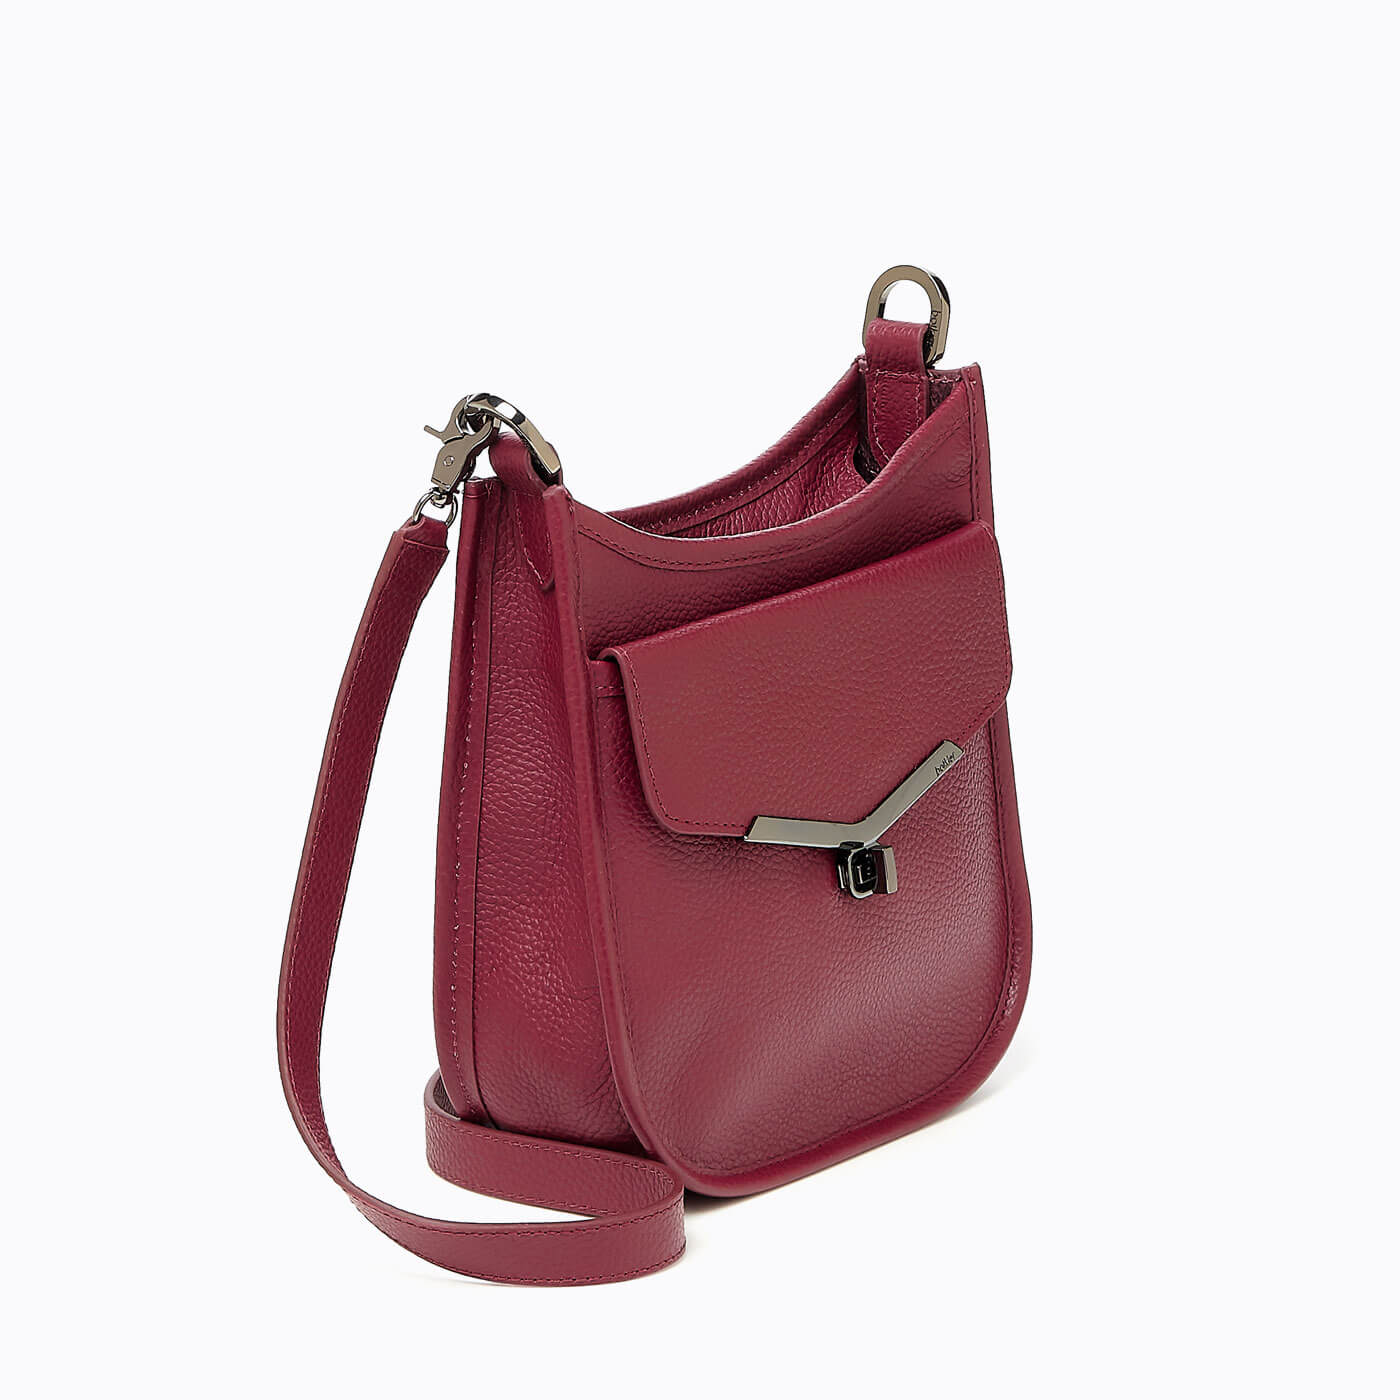 Botkier Trigger Flap Leather Hobo Bag in Blue | Lyst